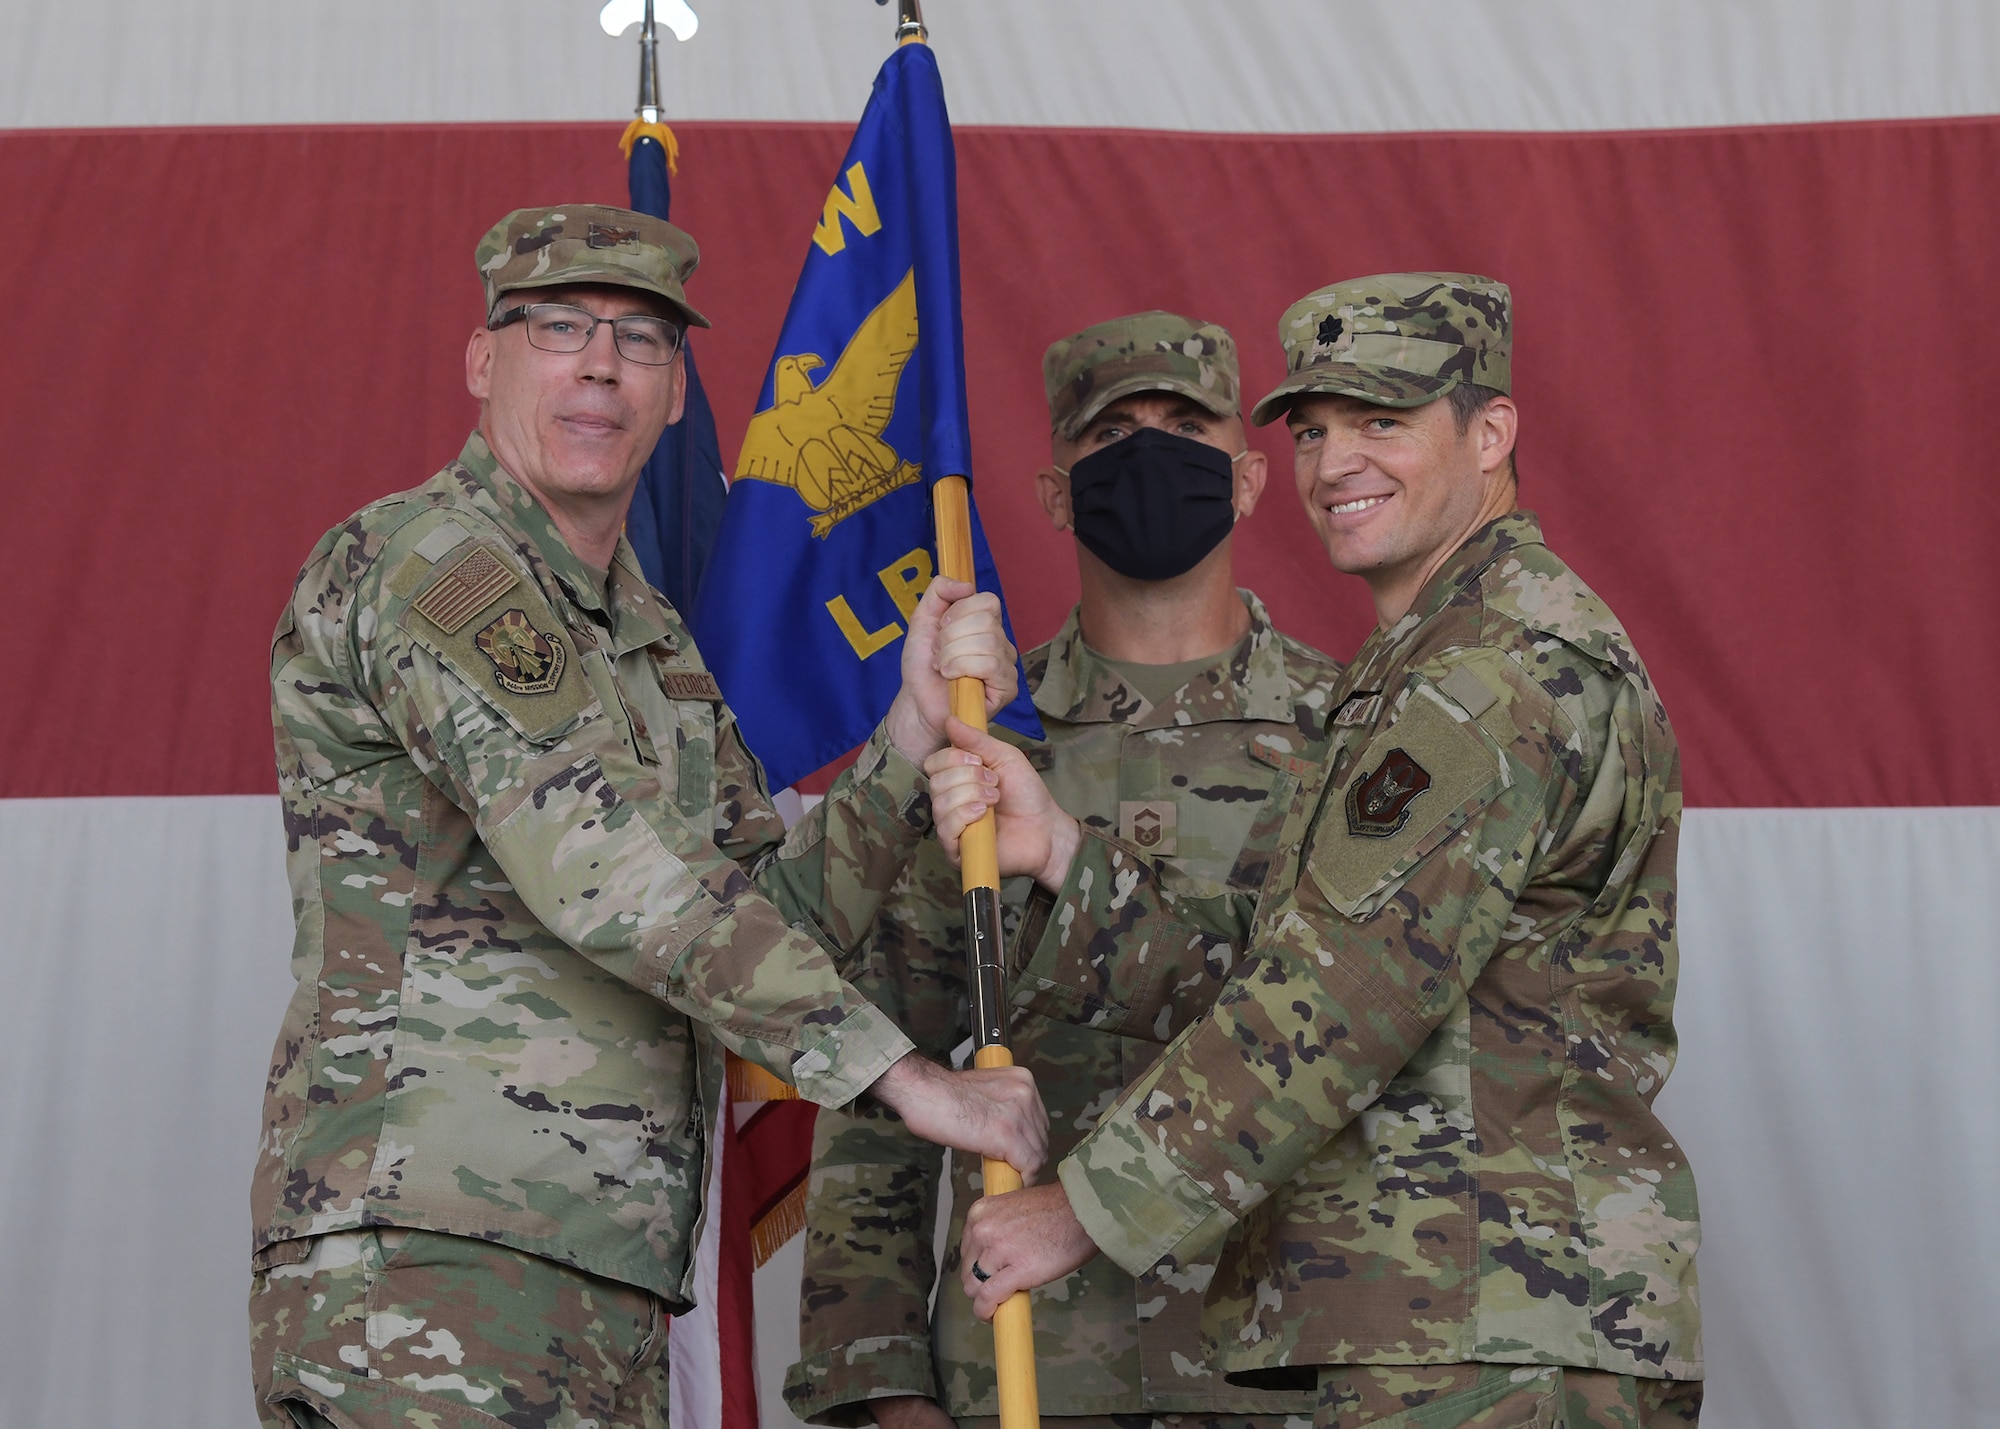 The 944th Logistics Readiness Squadron held a change of command ceremony at Luke Air Force Base, Arizona, October 2, 2021. Reserve Citizen Airman Lt. Col. Ronald J. ‘Smokin’ Sloma, 944th LRS outgoing commander, relinquished command to Reserve Citizen Airman Lt. Col. Jalen A. ‘Rex’ Whitener, in-coming commander, in front of family, friends, and military members.